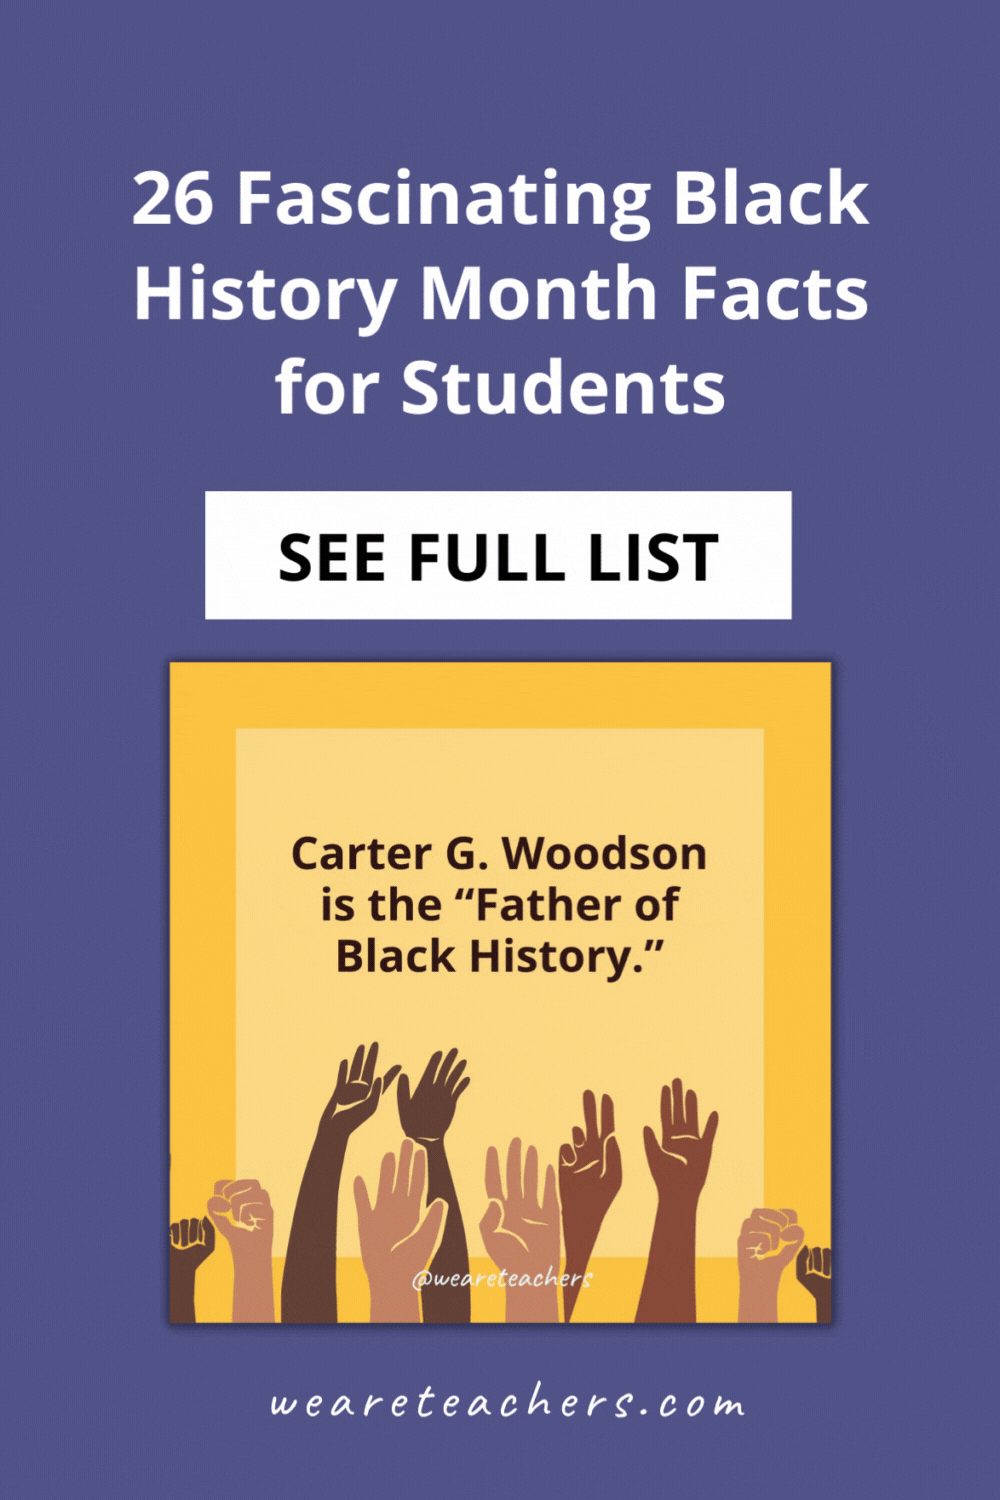 Share these Black History Month facts with kids this February and throughout the year to celebrate incredible milestones and victories.